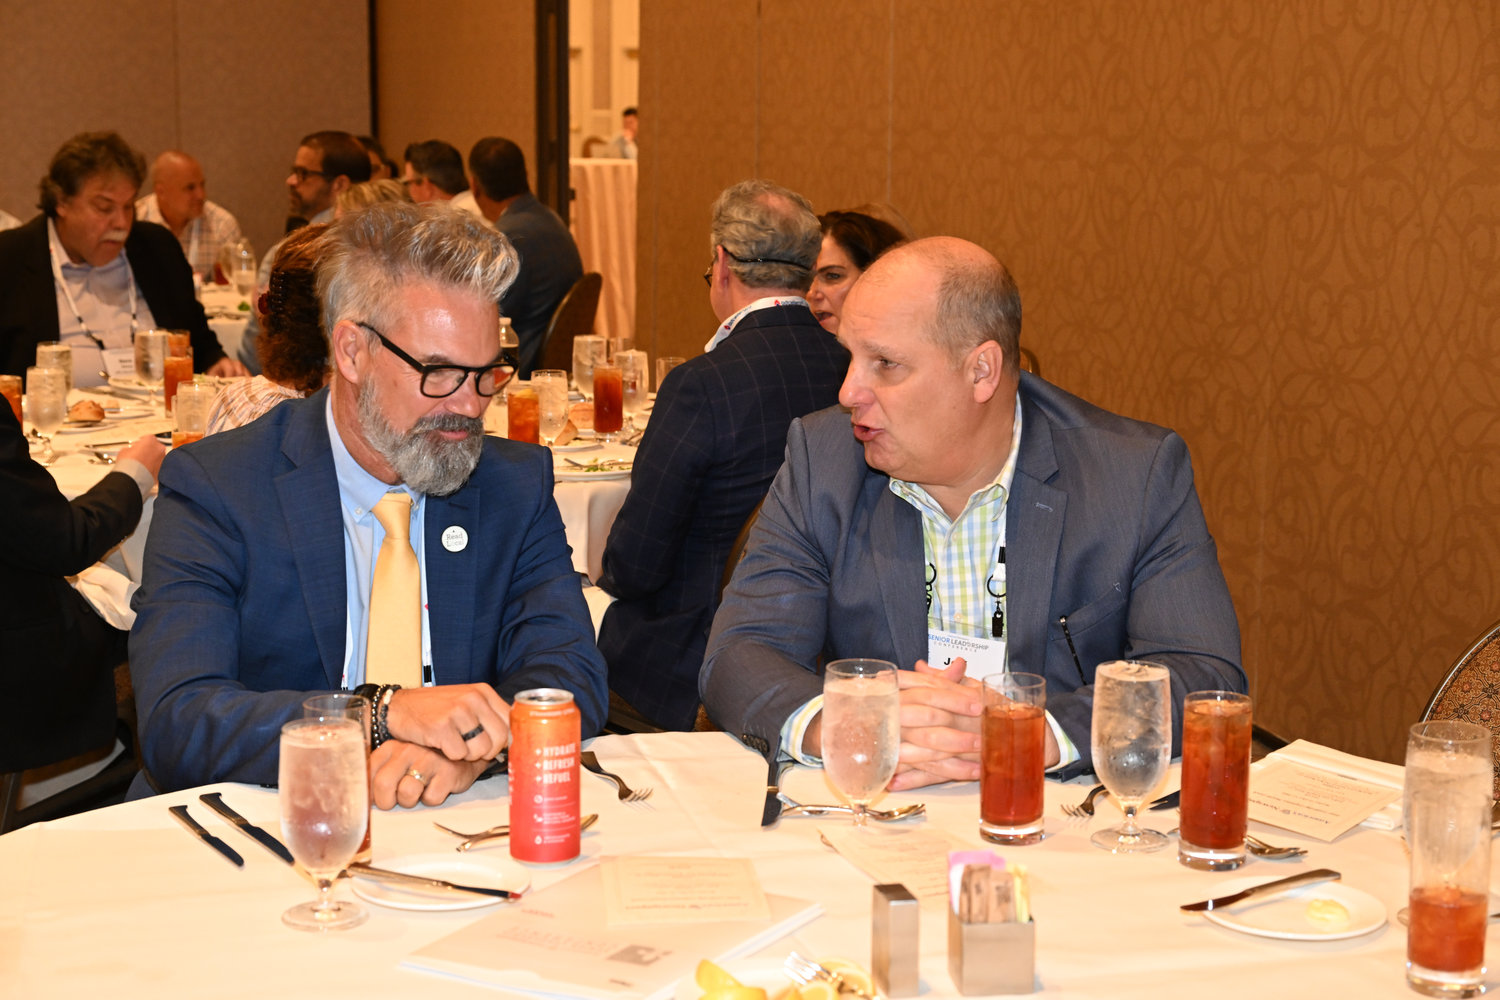 Networking at the Senior Leadership Conference. (Photo by Jeff Strout)